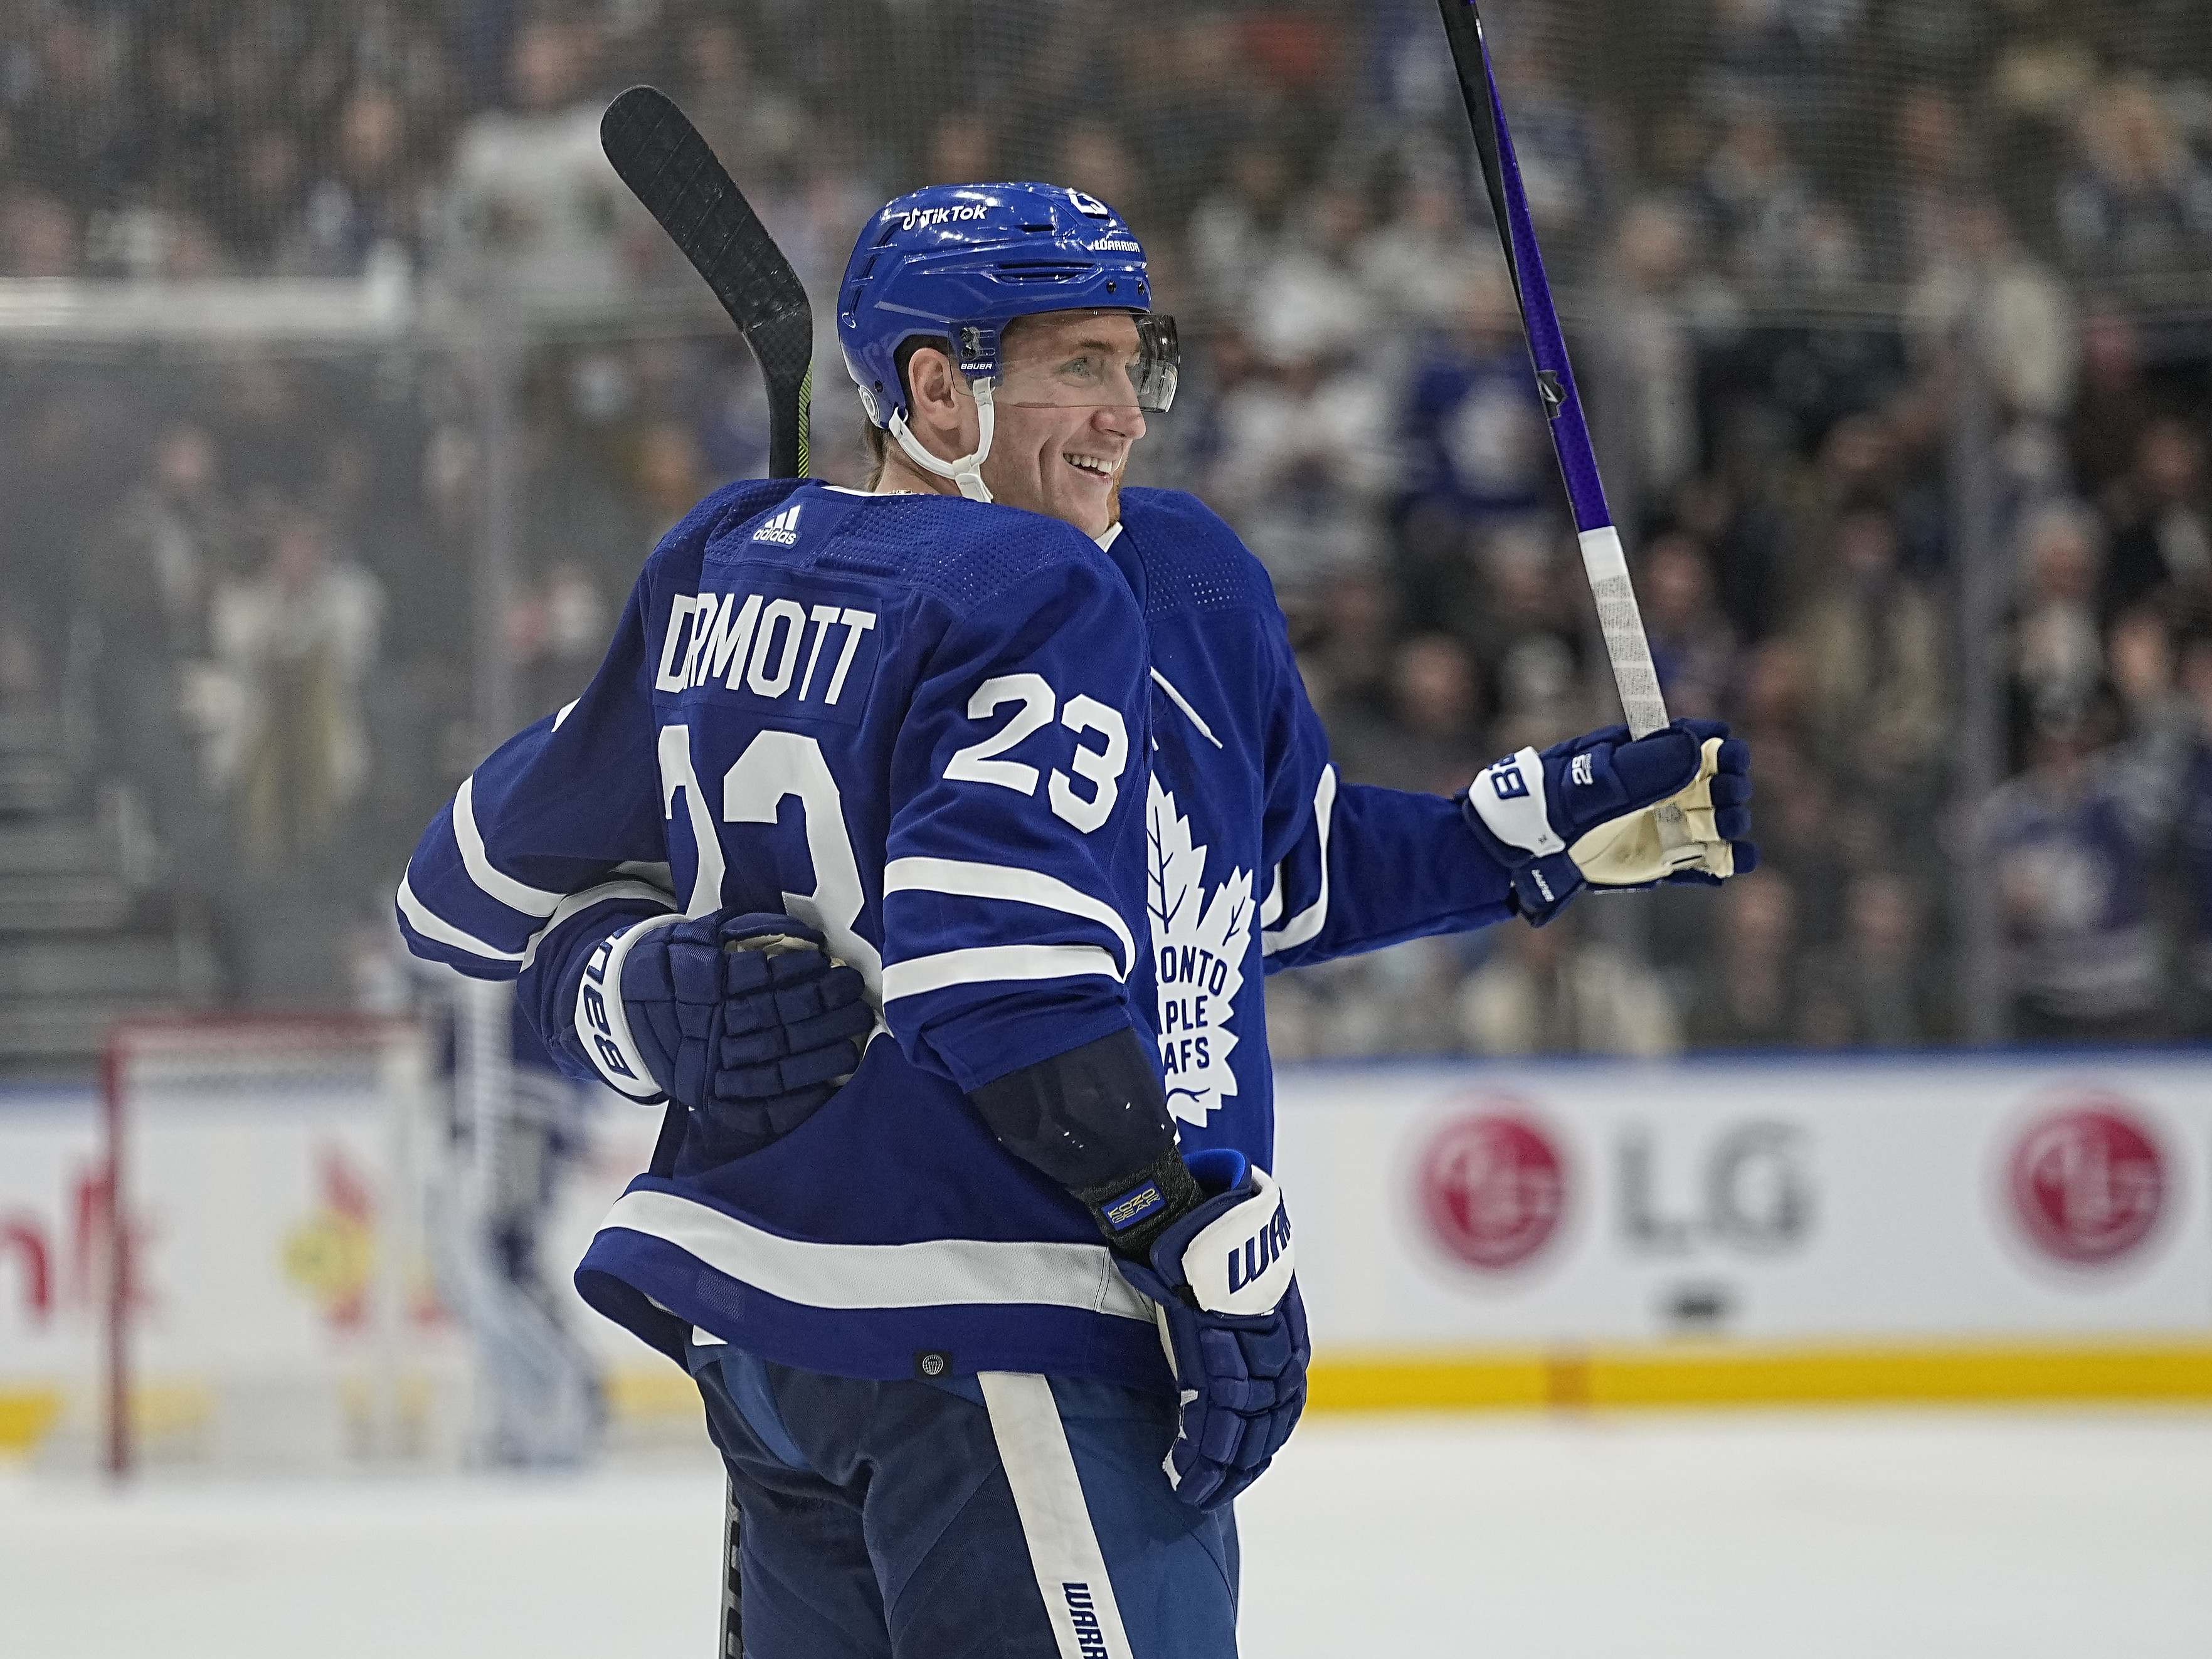 Dec 1, 2021; Toronto, Ontario, CAN; Toronto Maple Leafs defenseman Travis Dermott (23) celebrates his goal against the Colorado Avalanche with Toronto Maple Leafs forward William Nylander (88) during the second period at Scotiabank Arena.